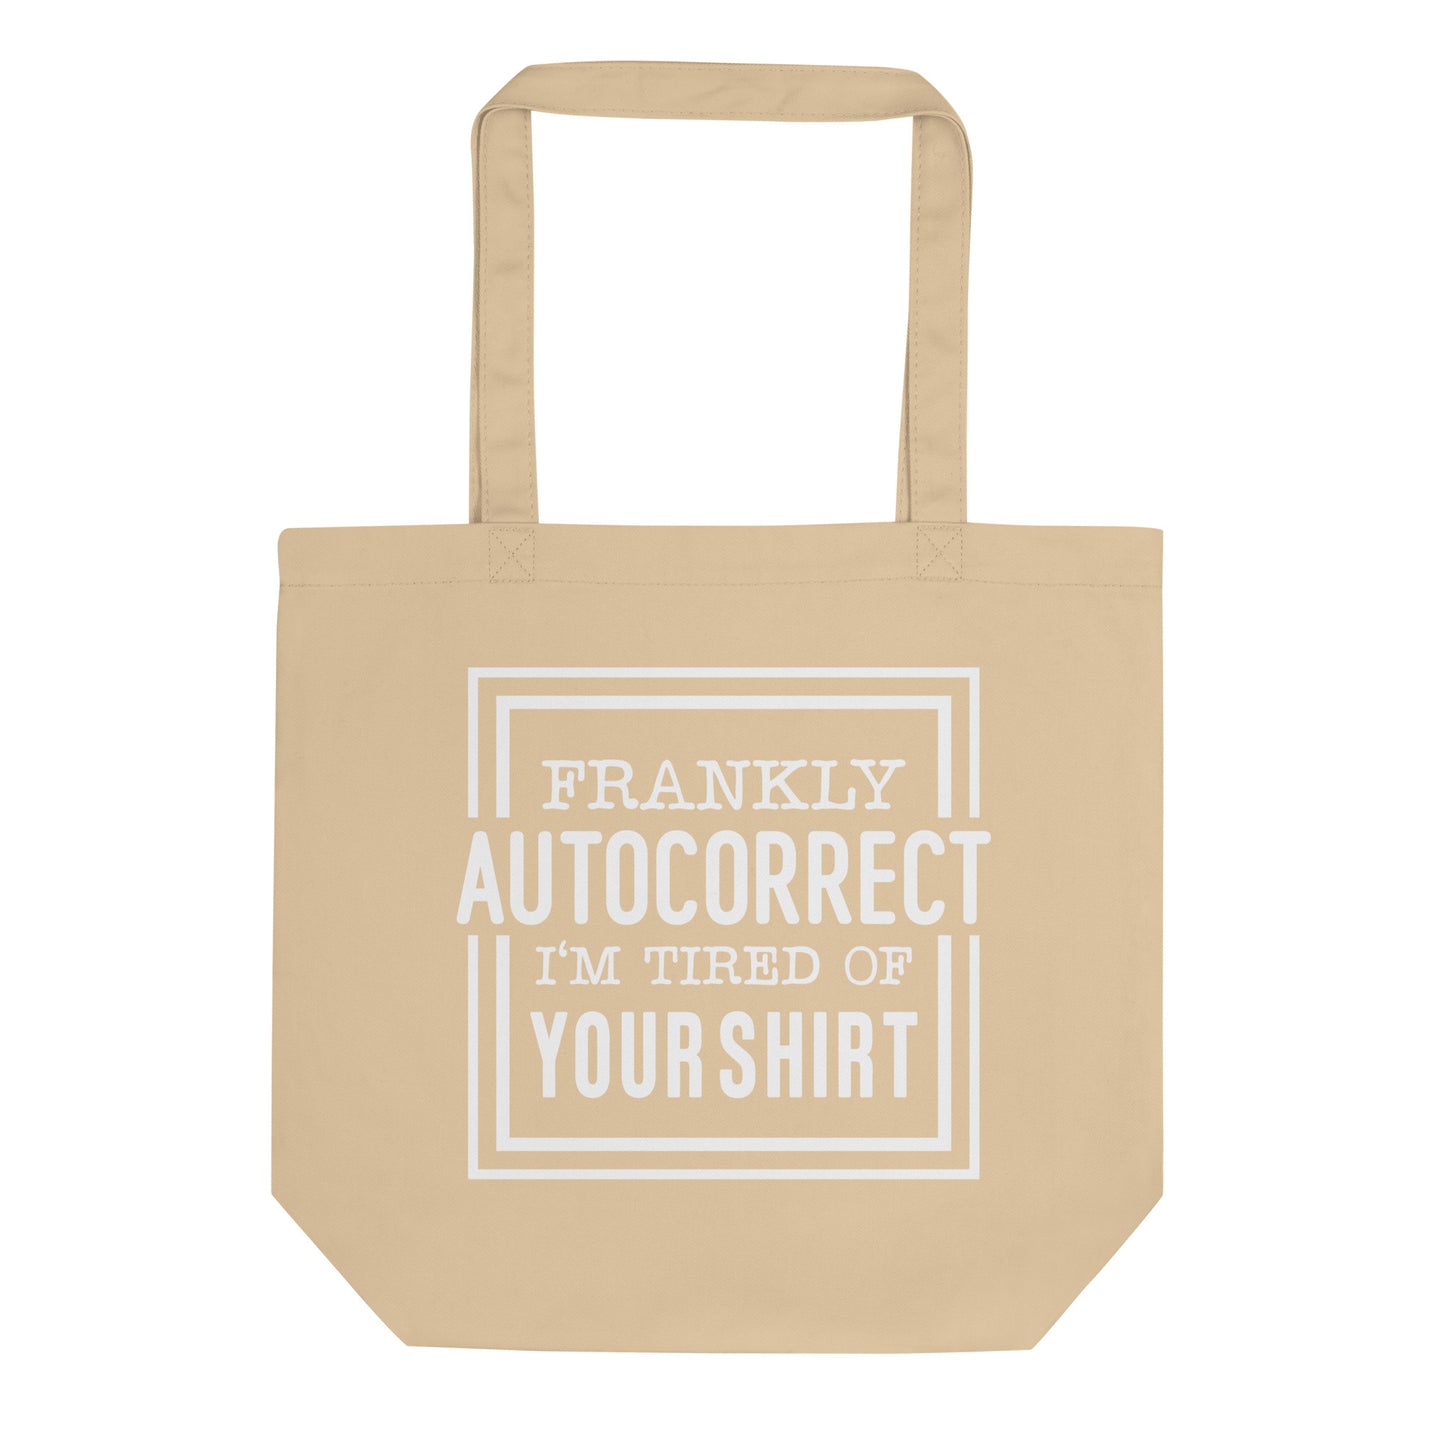 Frankly Autocorrect I'm Tired of Your Shirt Eco Tote Bag